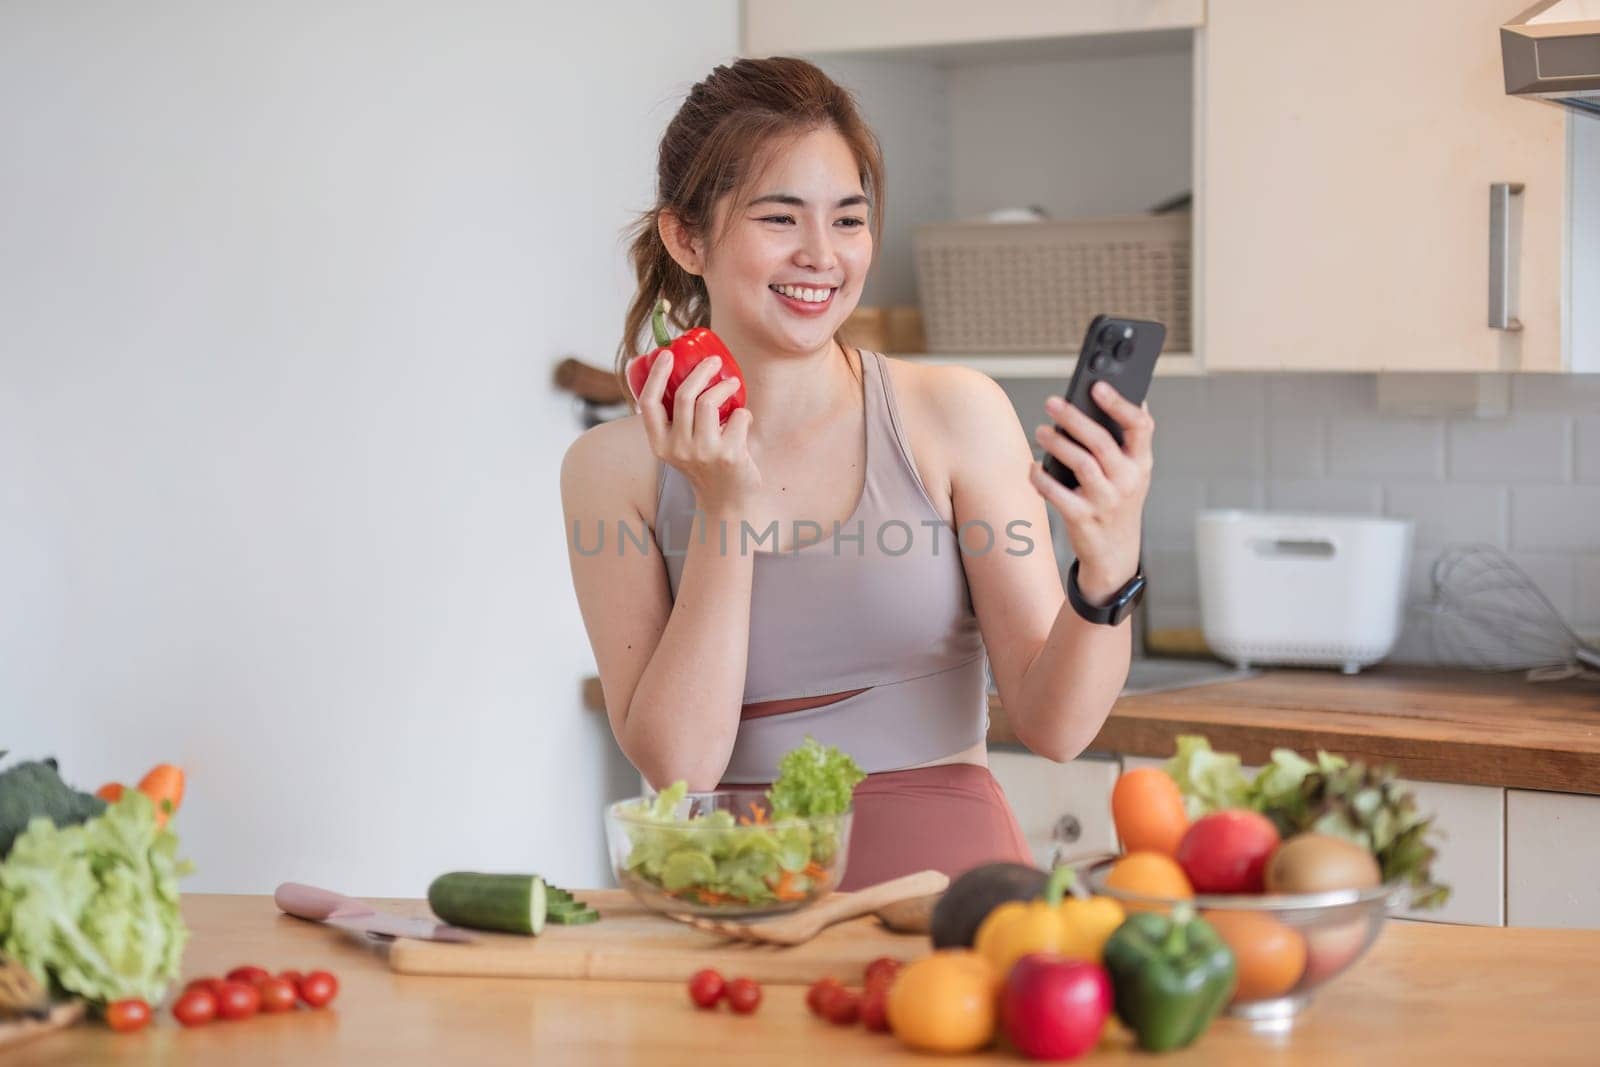 Beautiful young woman in exercise clothes having fun in a cute kitchen at home. Using the phone to study information And prepare vegan fruit salad dressings, fruit shakes, or healthy smoothies..